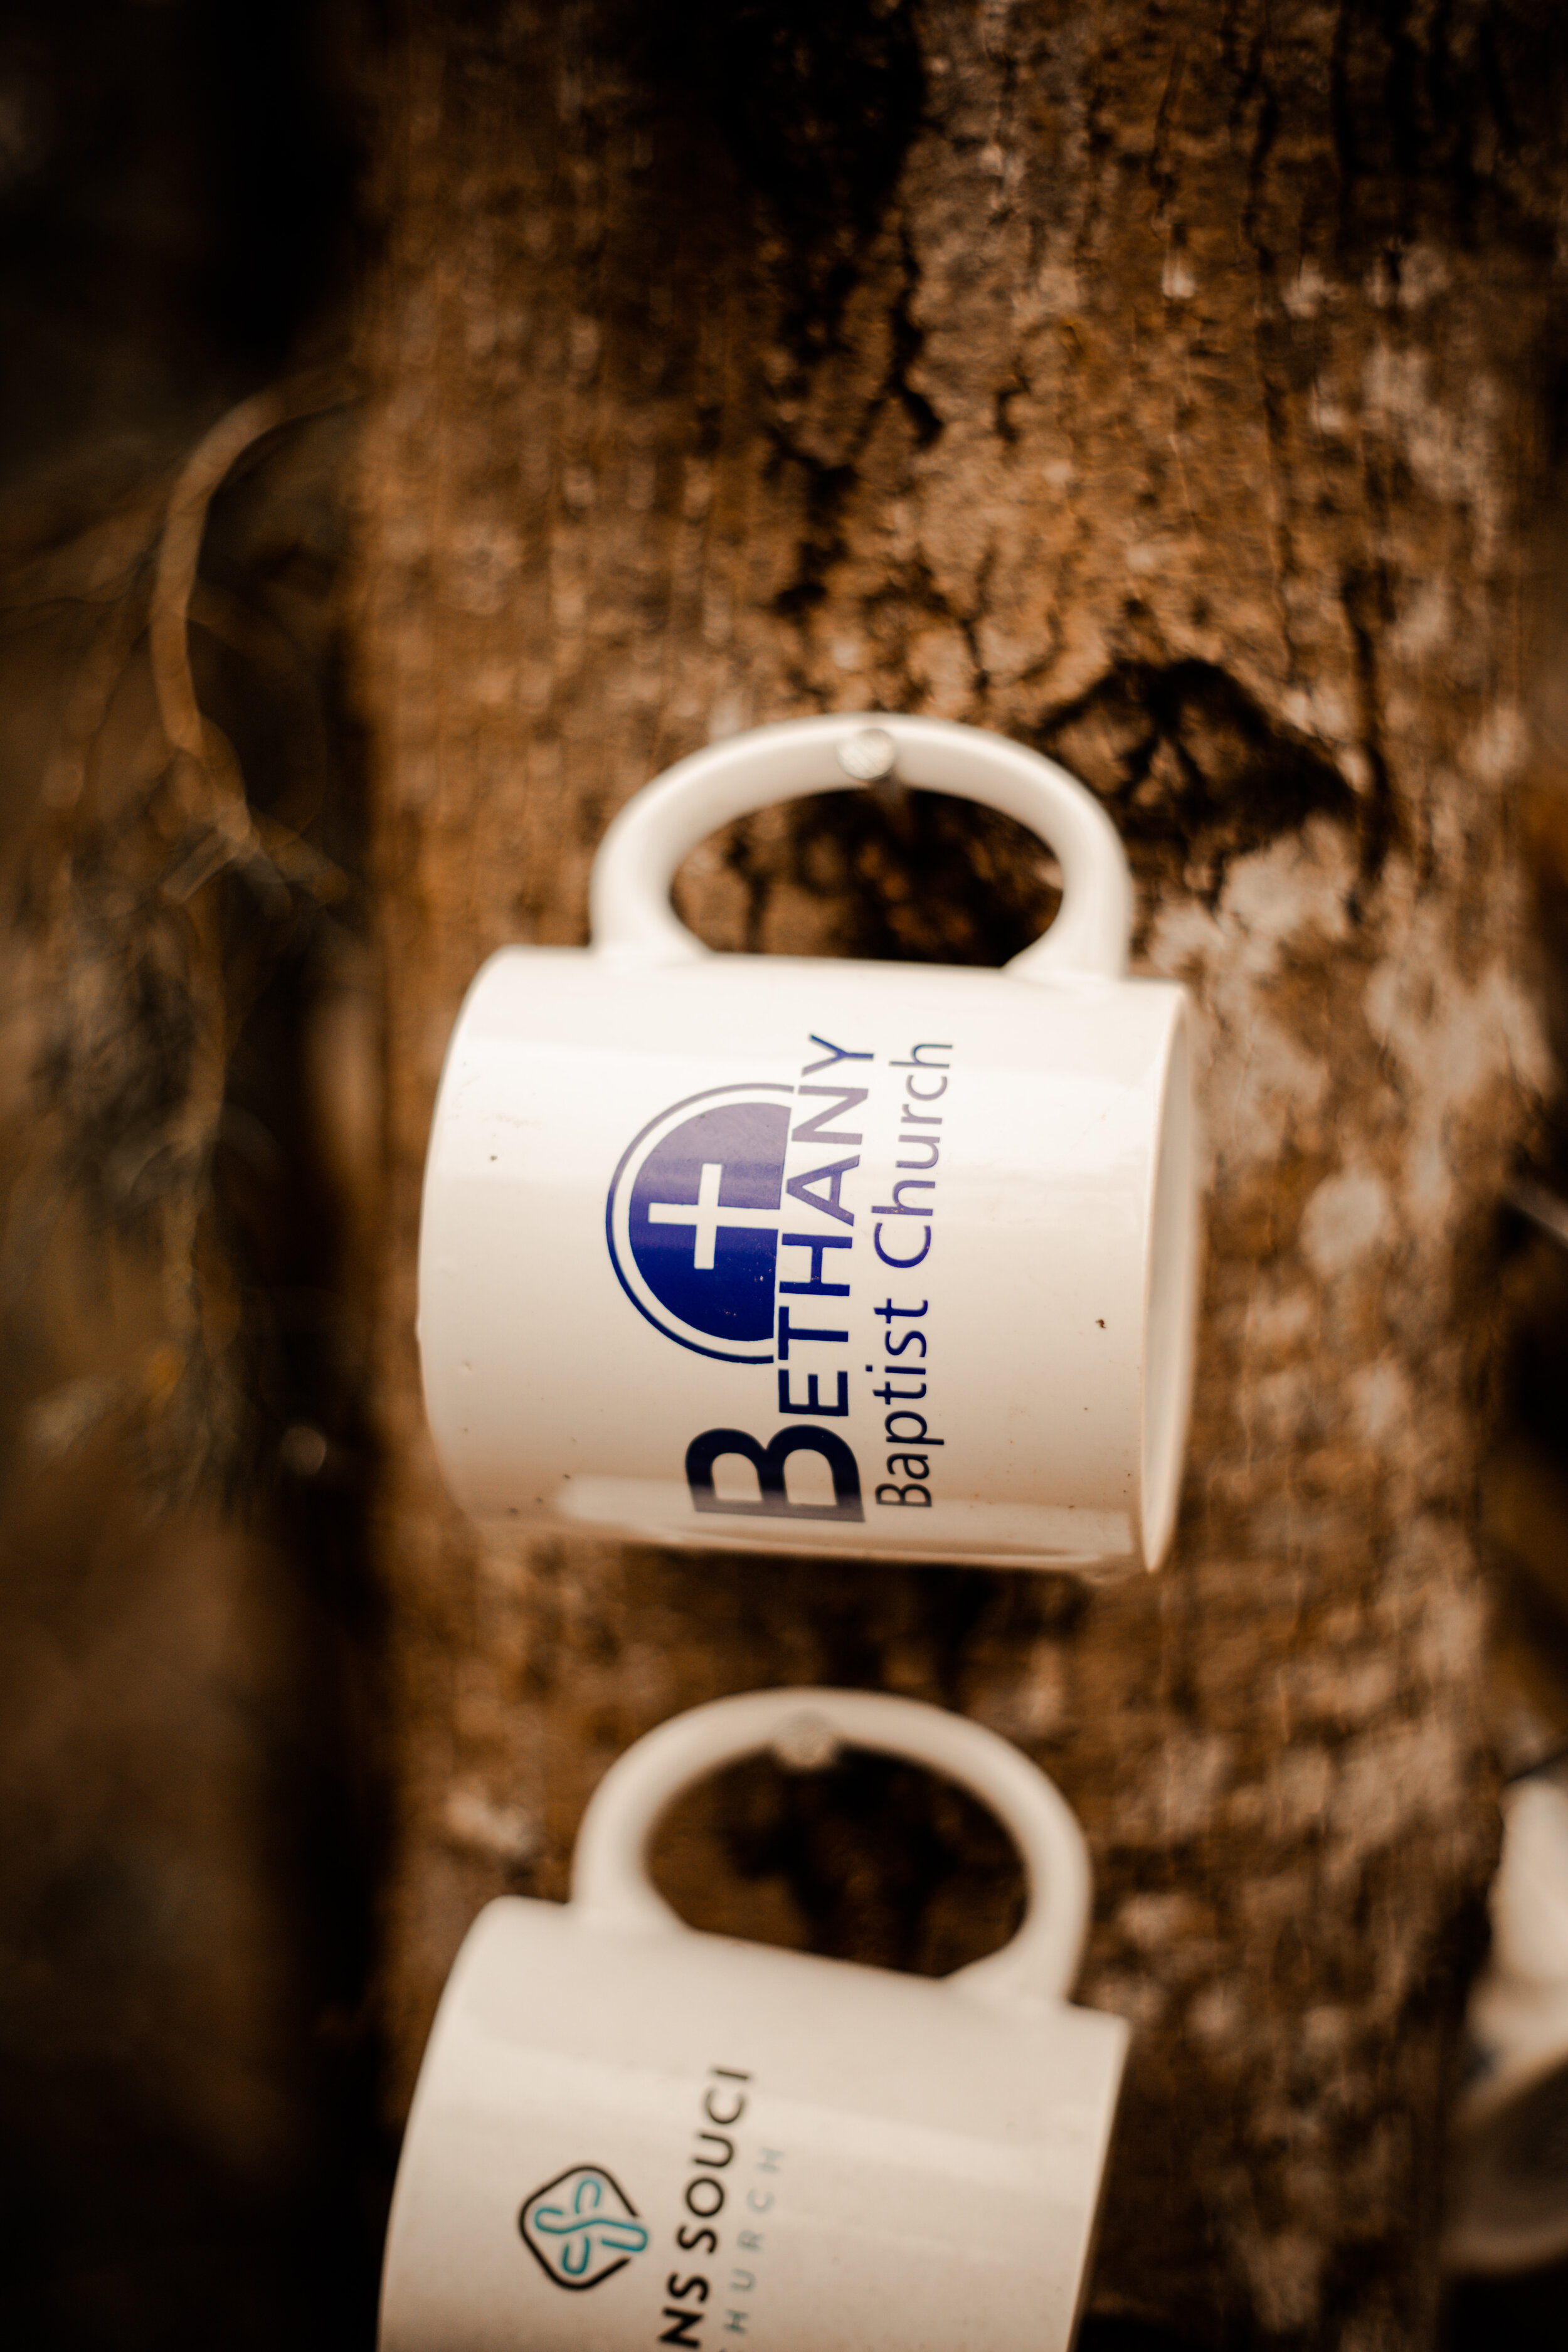 You may find many mugs with church logos.